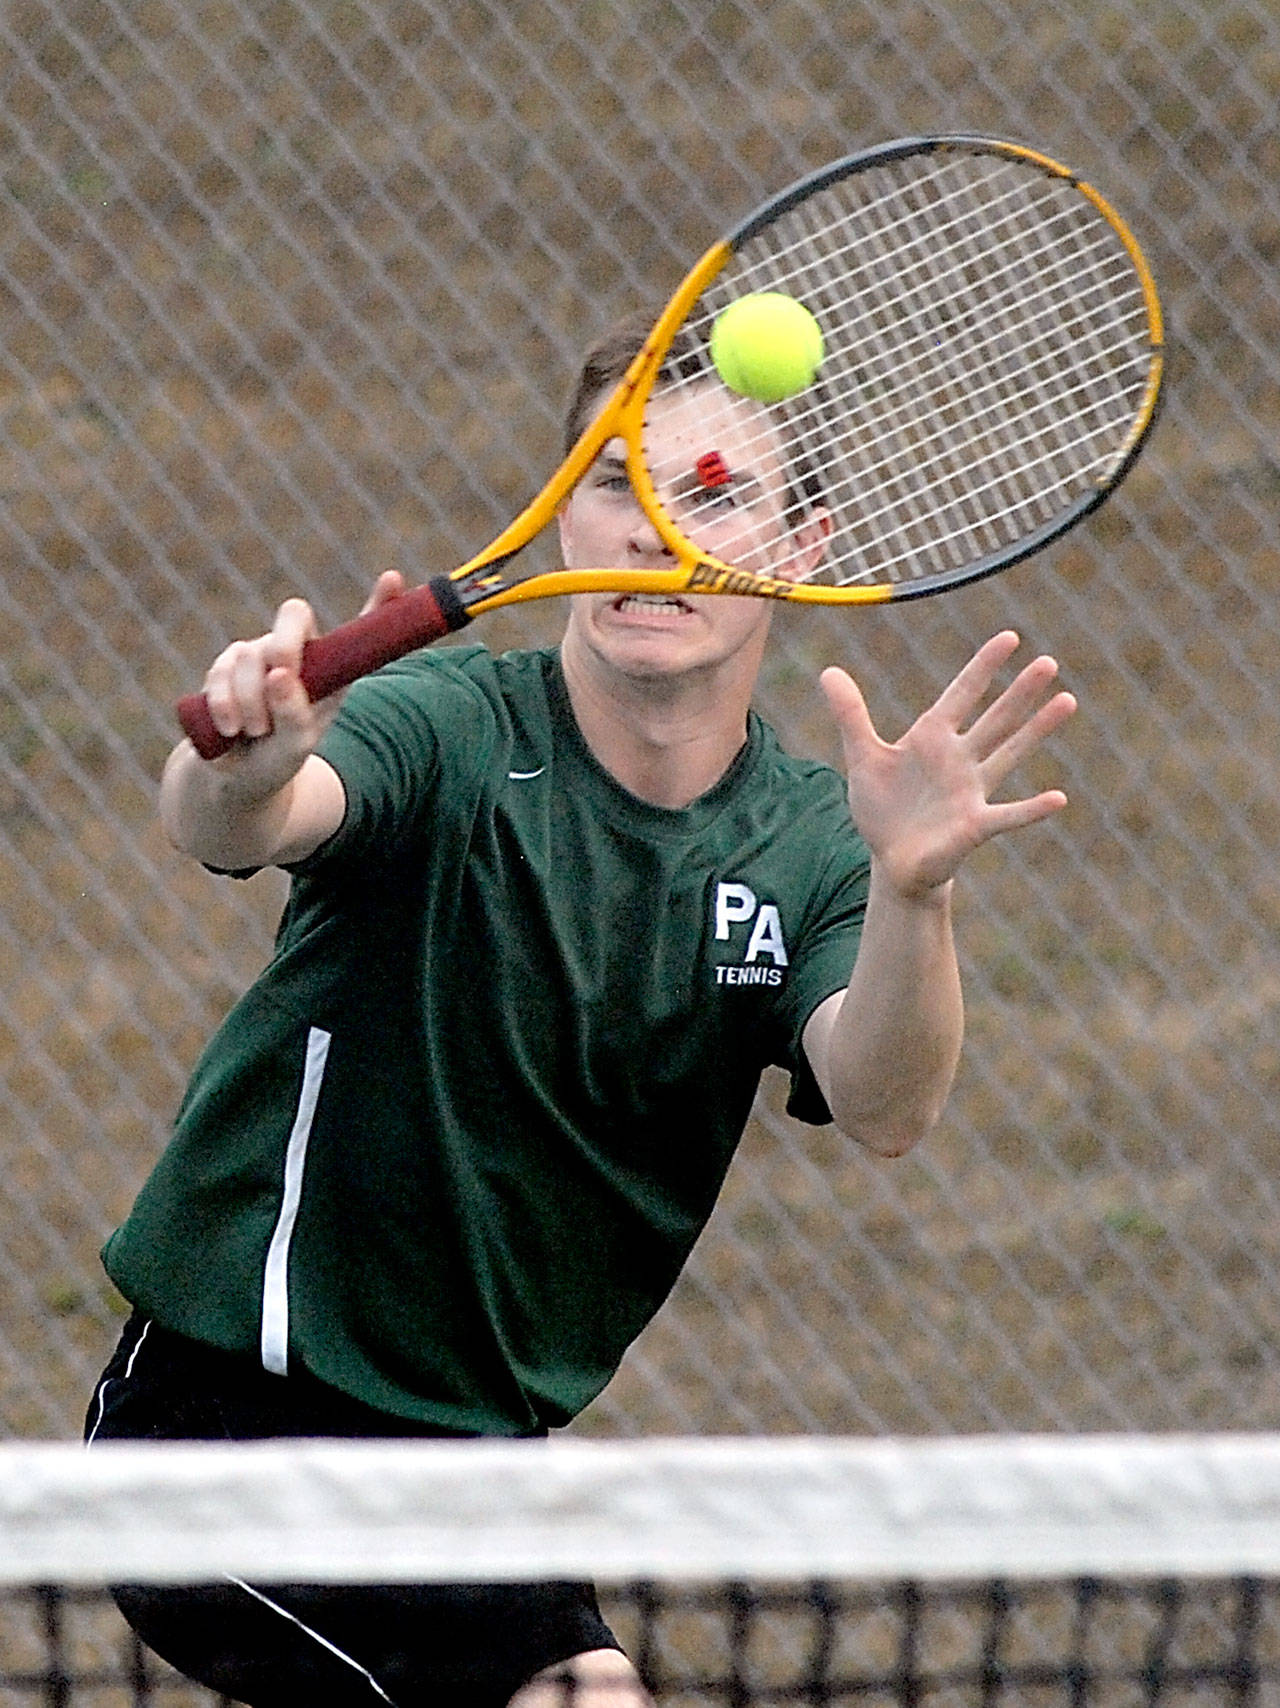 Keith Thorpe/Peninsula Daily News Port Angeles’ Milo Whitman goes for the return during his doubles match with partner Bo Bradow against North Kitsap’s Ryland Schmidt and Logan Chmielewski on Wednesday at Port Angeles High School.